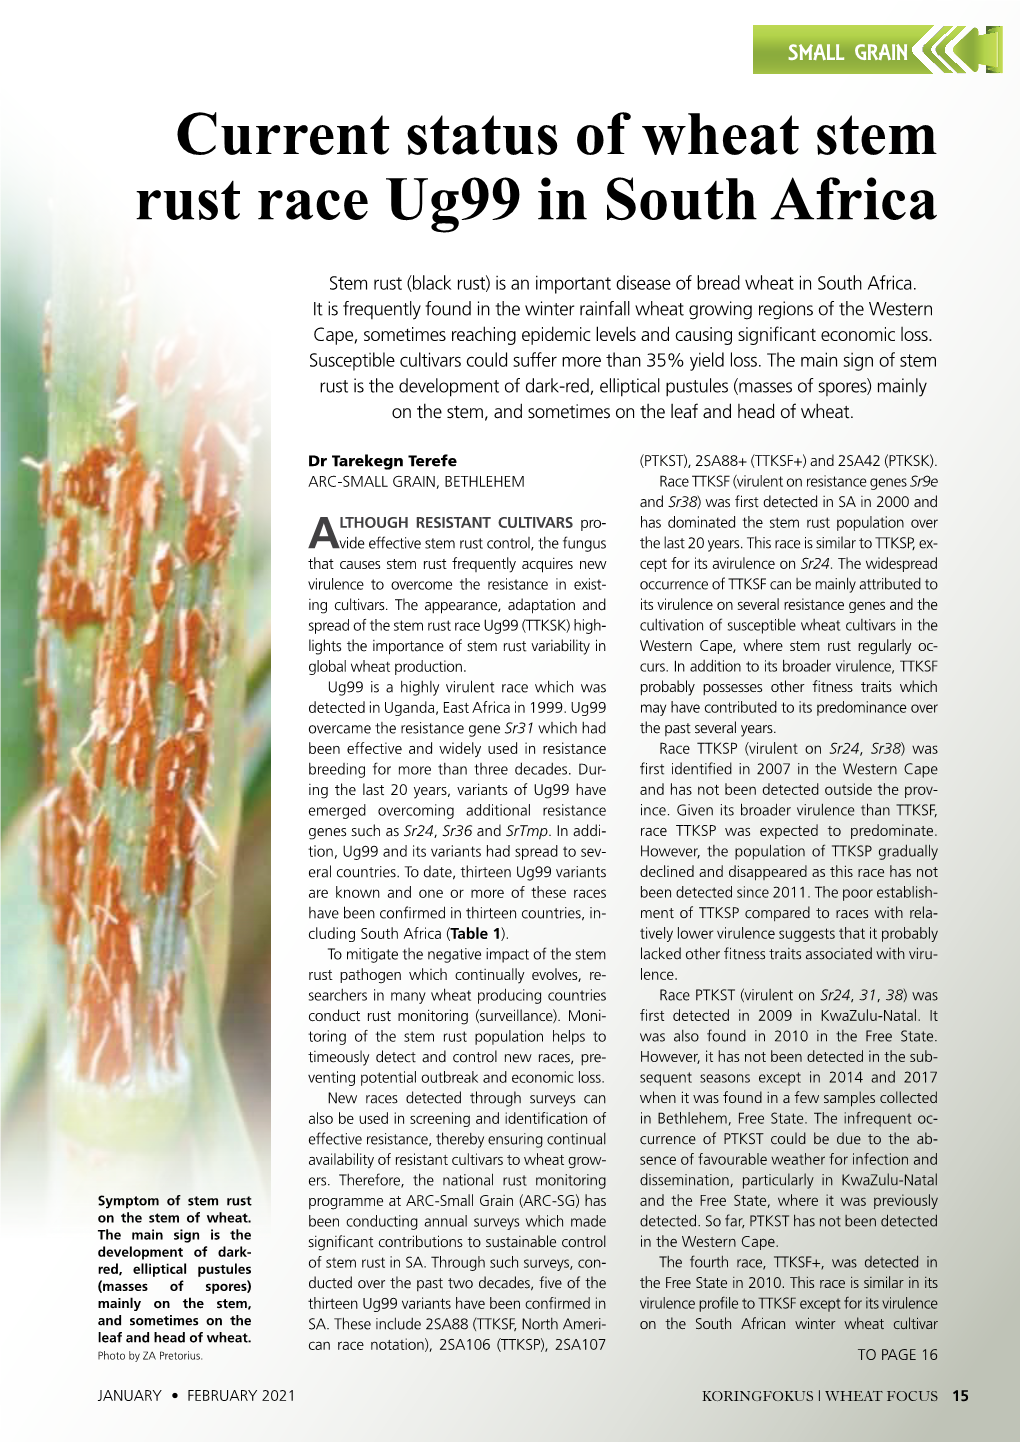 Current Status of Wheat Stem Rust Race Ug99 in South Africa